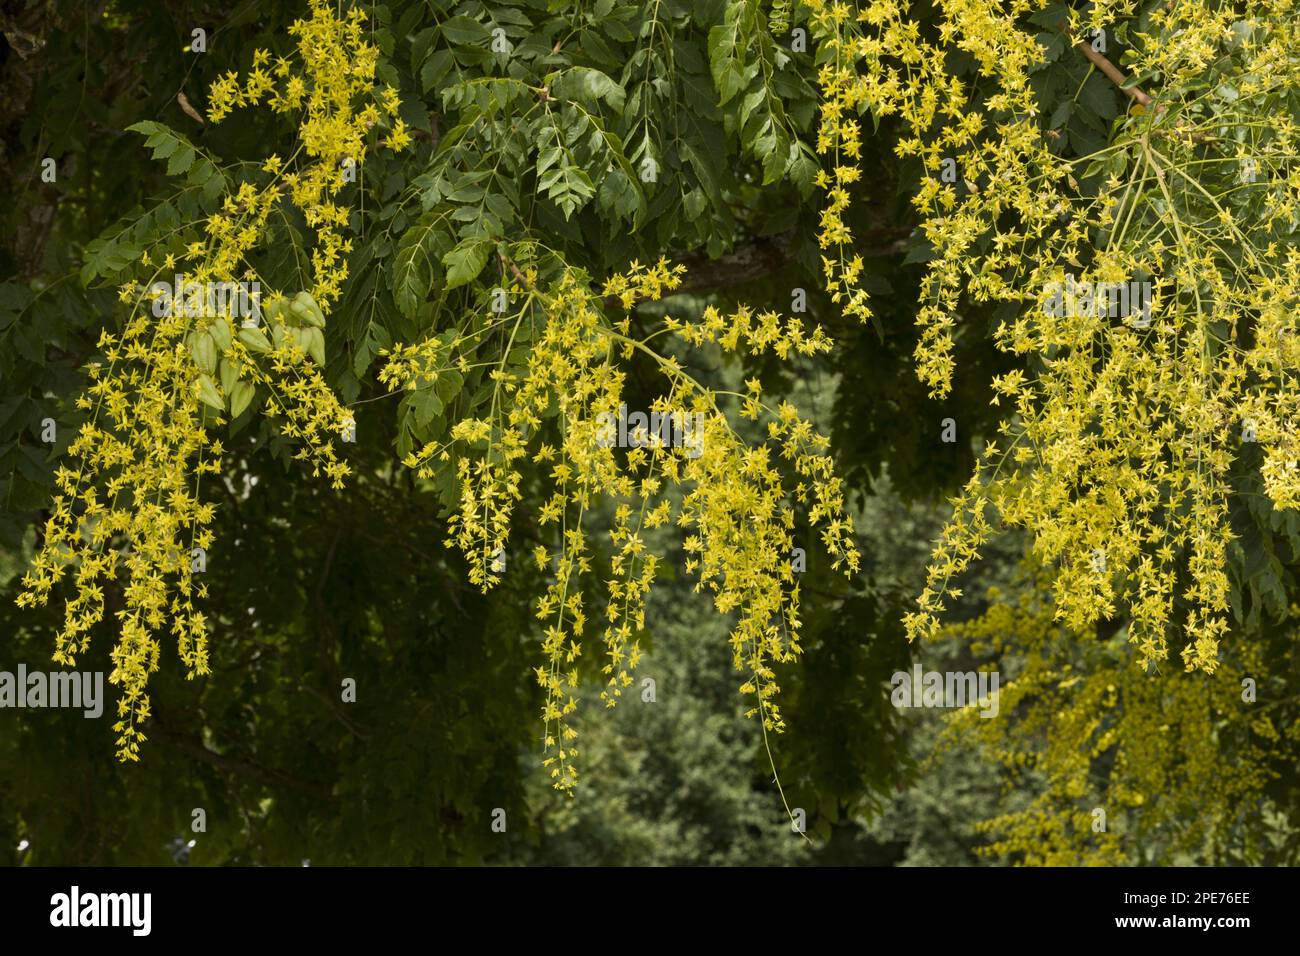 Golden Rain Tree (Koelreuteria paniculata) introduced species, close-up of flowers and fruits, France Stock Photo